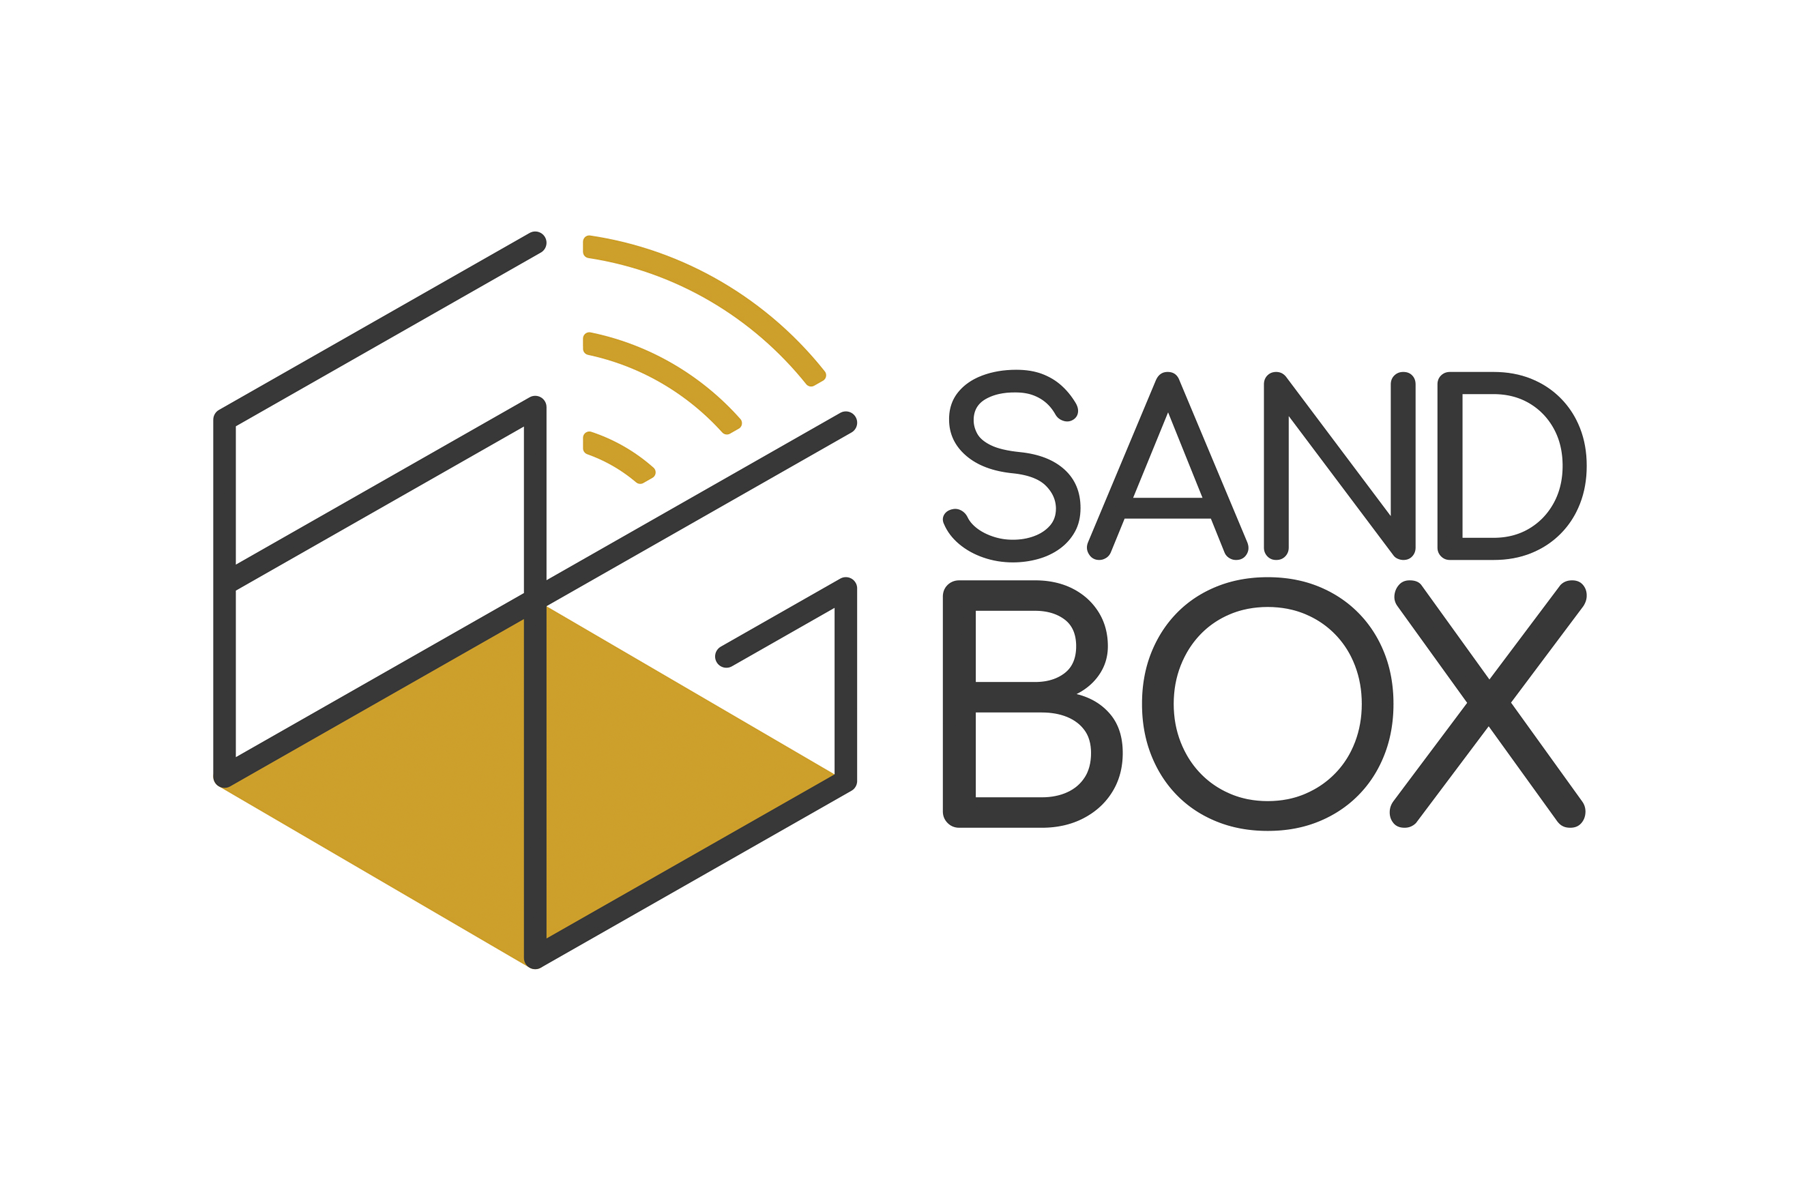 6G-SANDBOX signs a Memorandum of Understanding with the European Space Agency to integrate satellites with 5G and 6G communications.